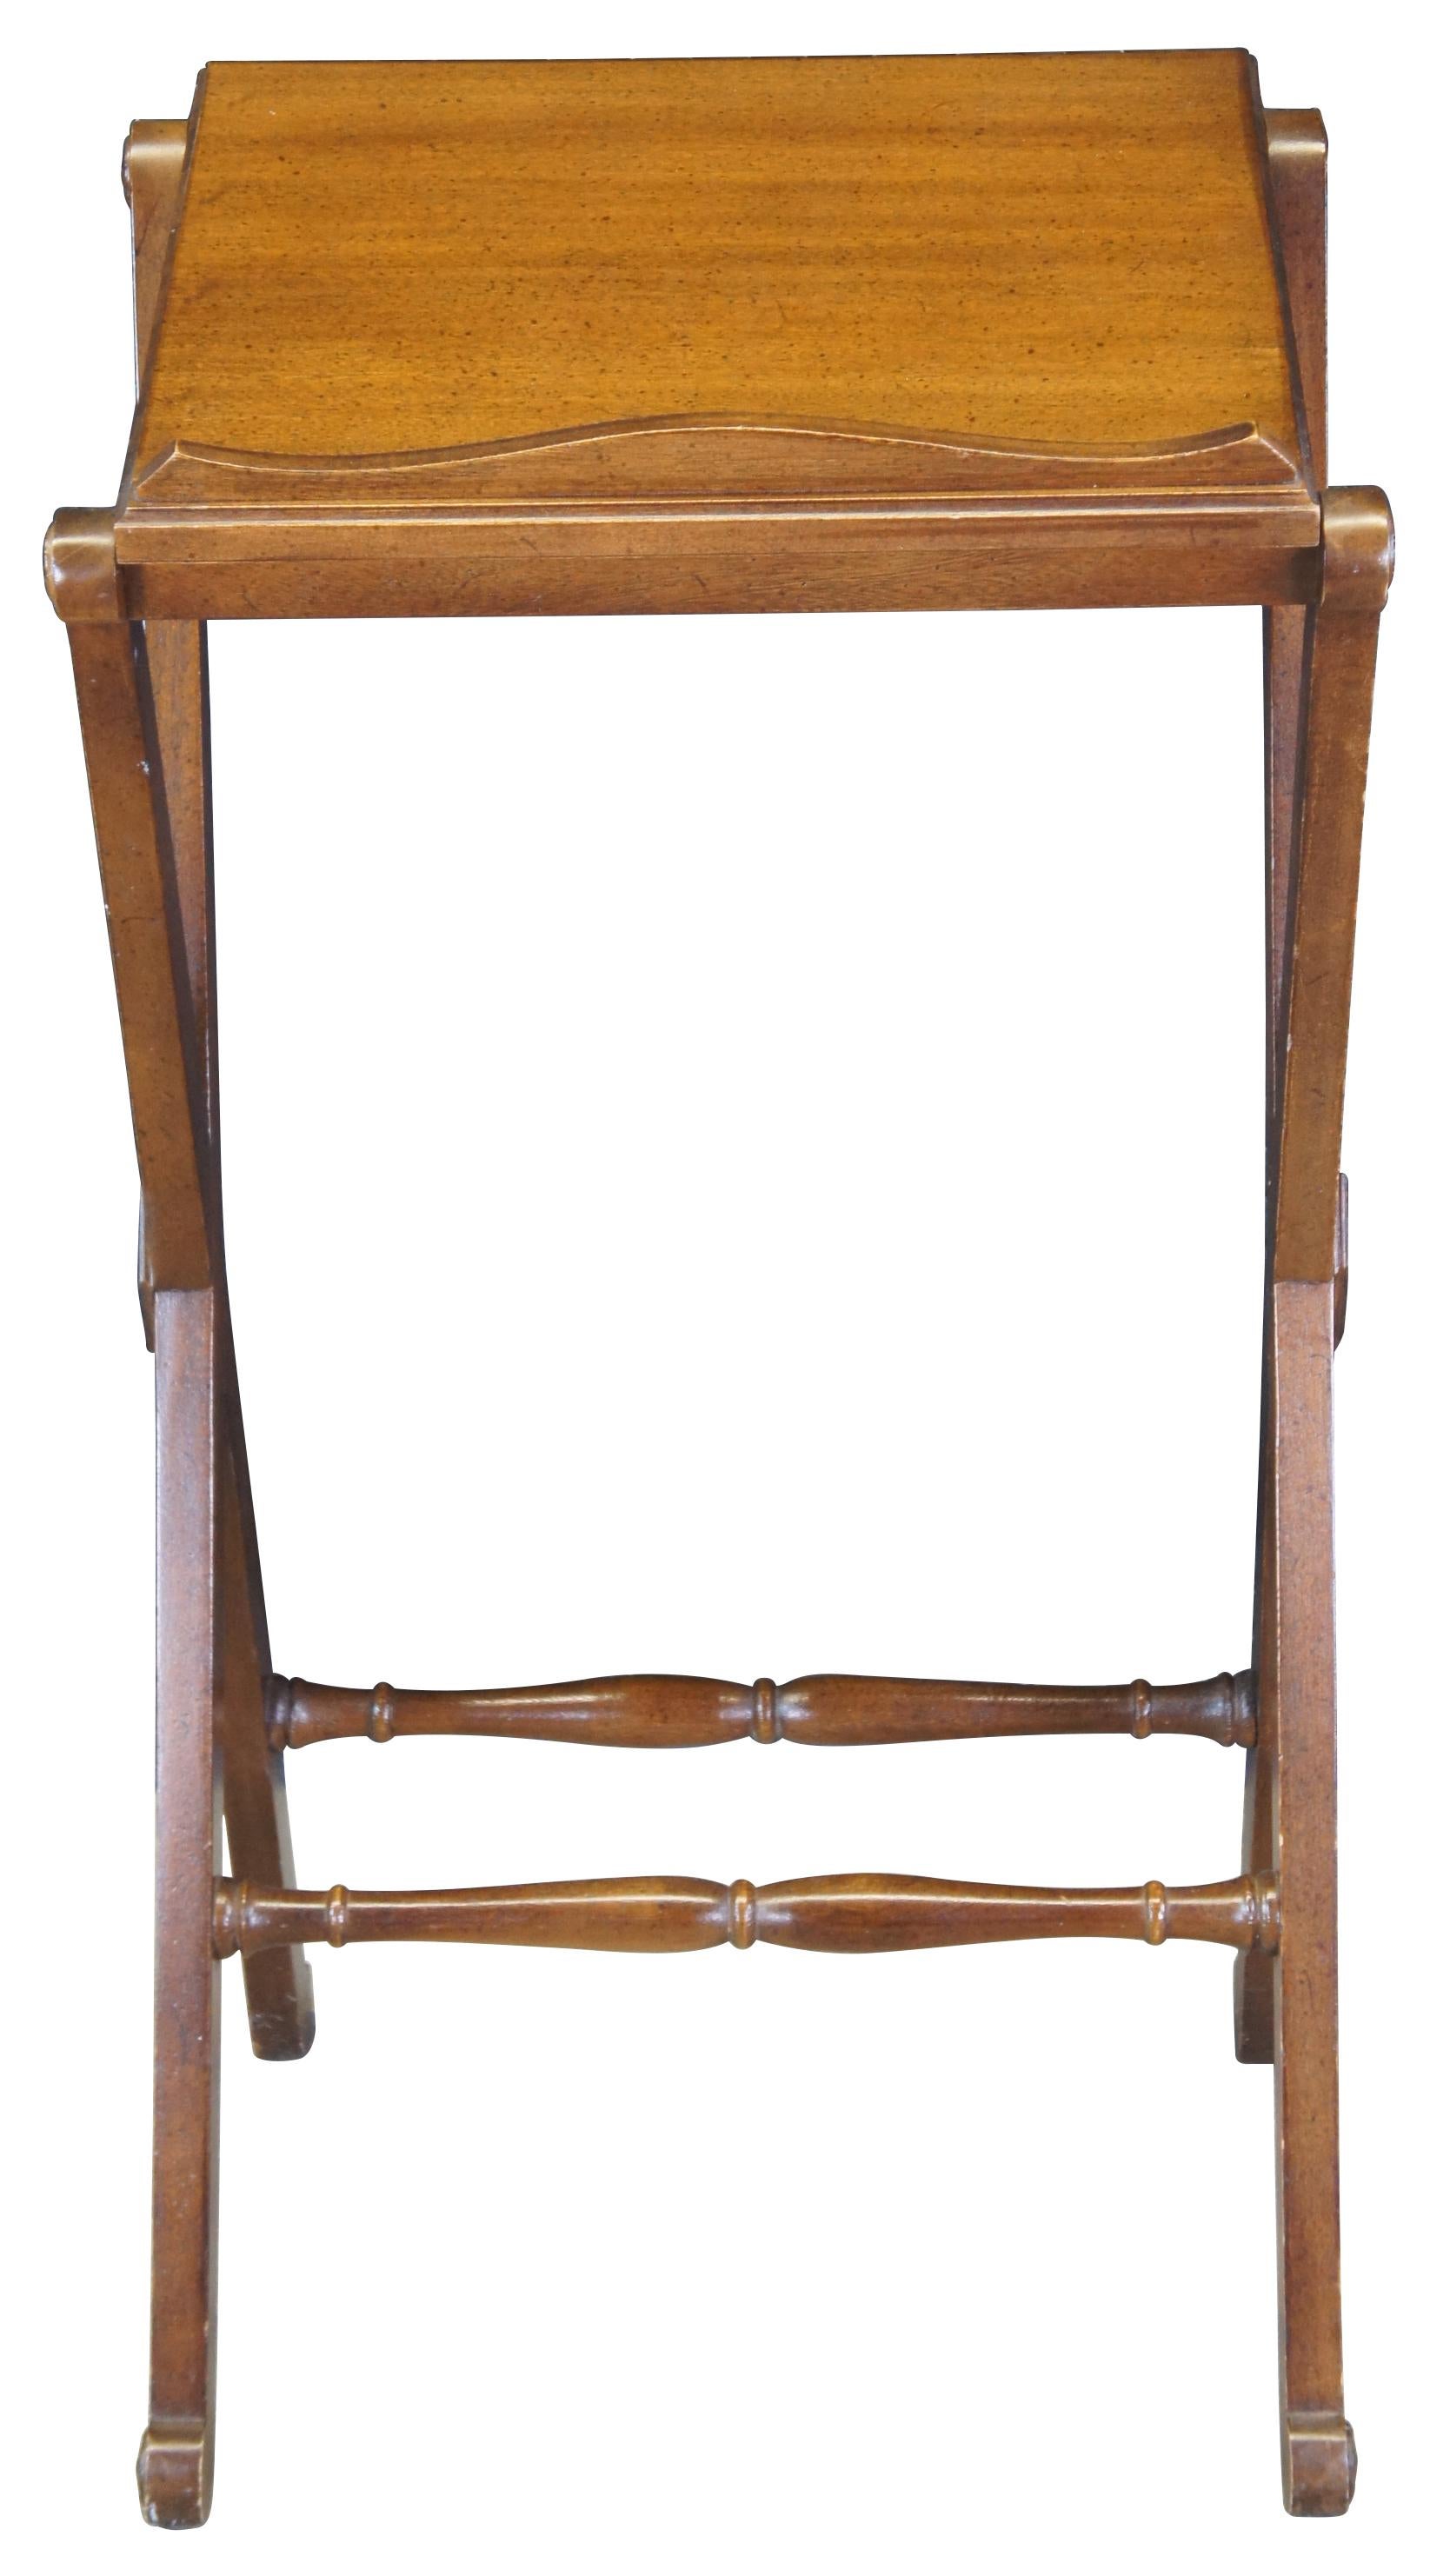 A vintage French inspired podium by Drexel, circa 1970s. Features a walnut-finished frame with an inclined surface showing a serpentine lipped bottom on an a pair of X-shaped supports joined by two baluster stretchers. The underside of the podium’s